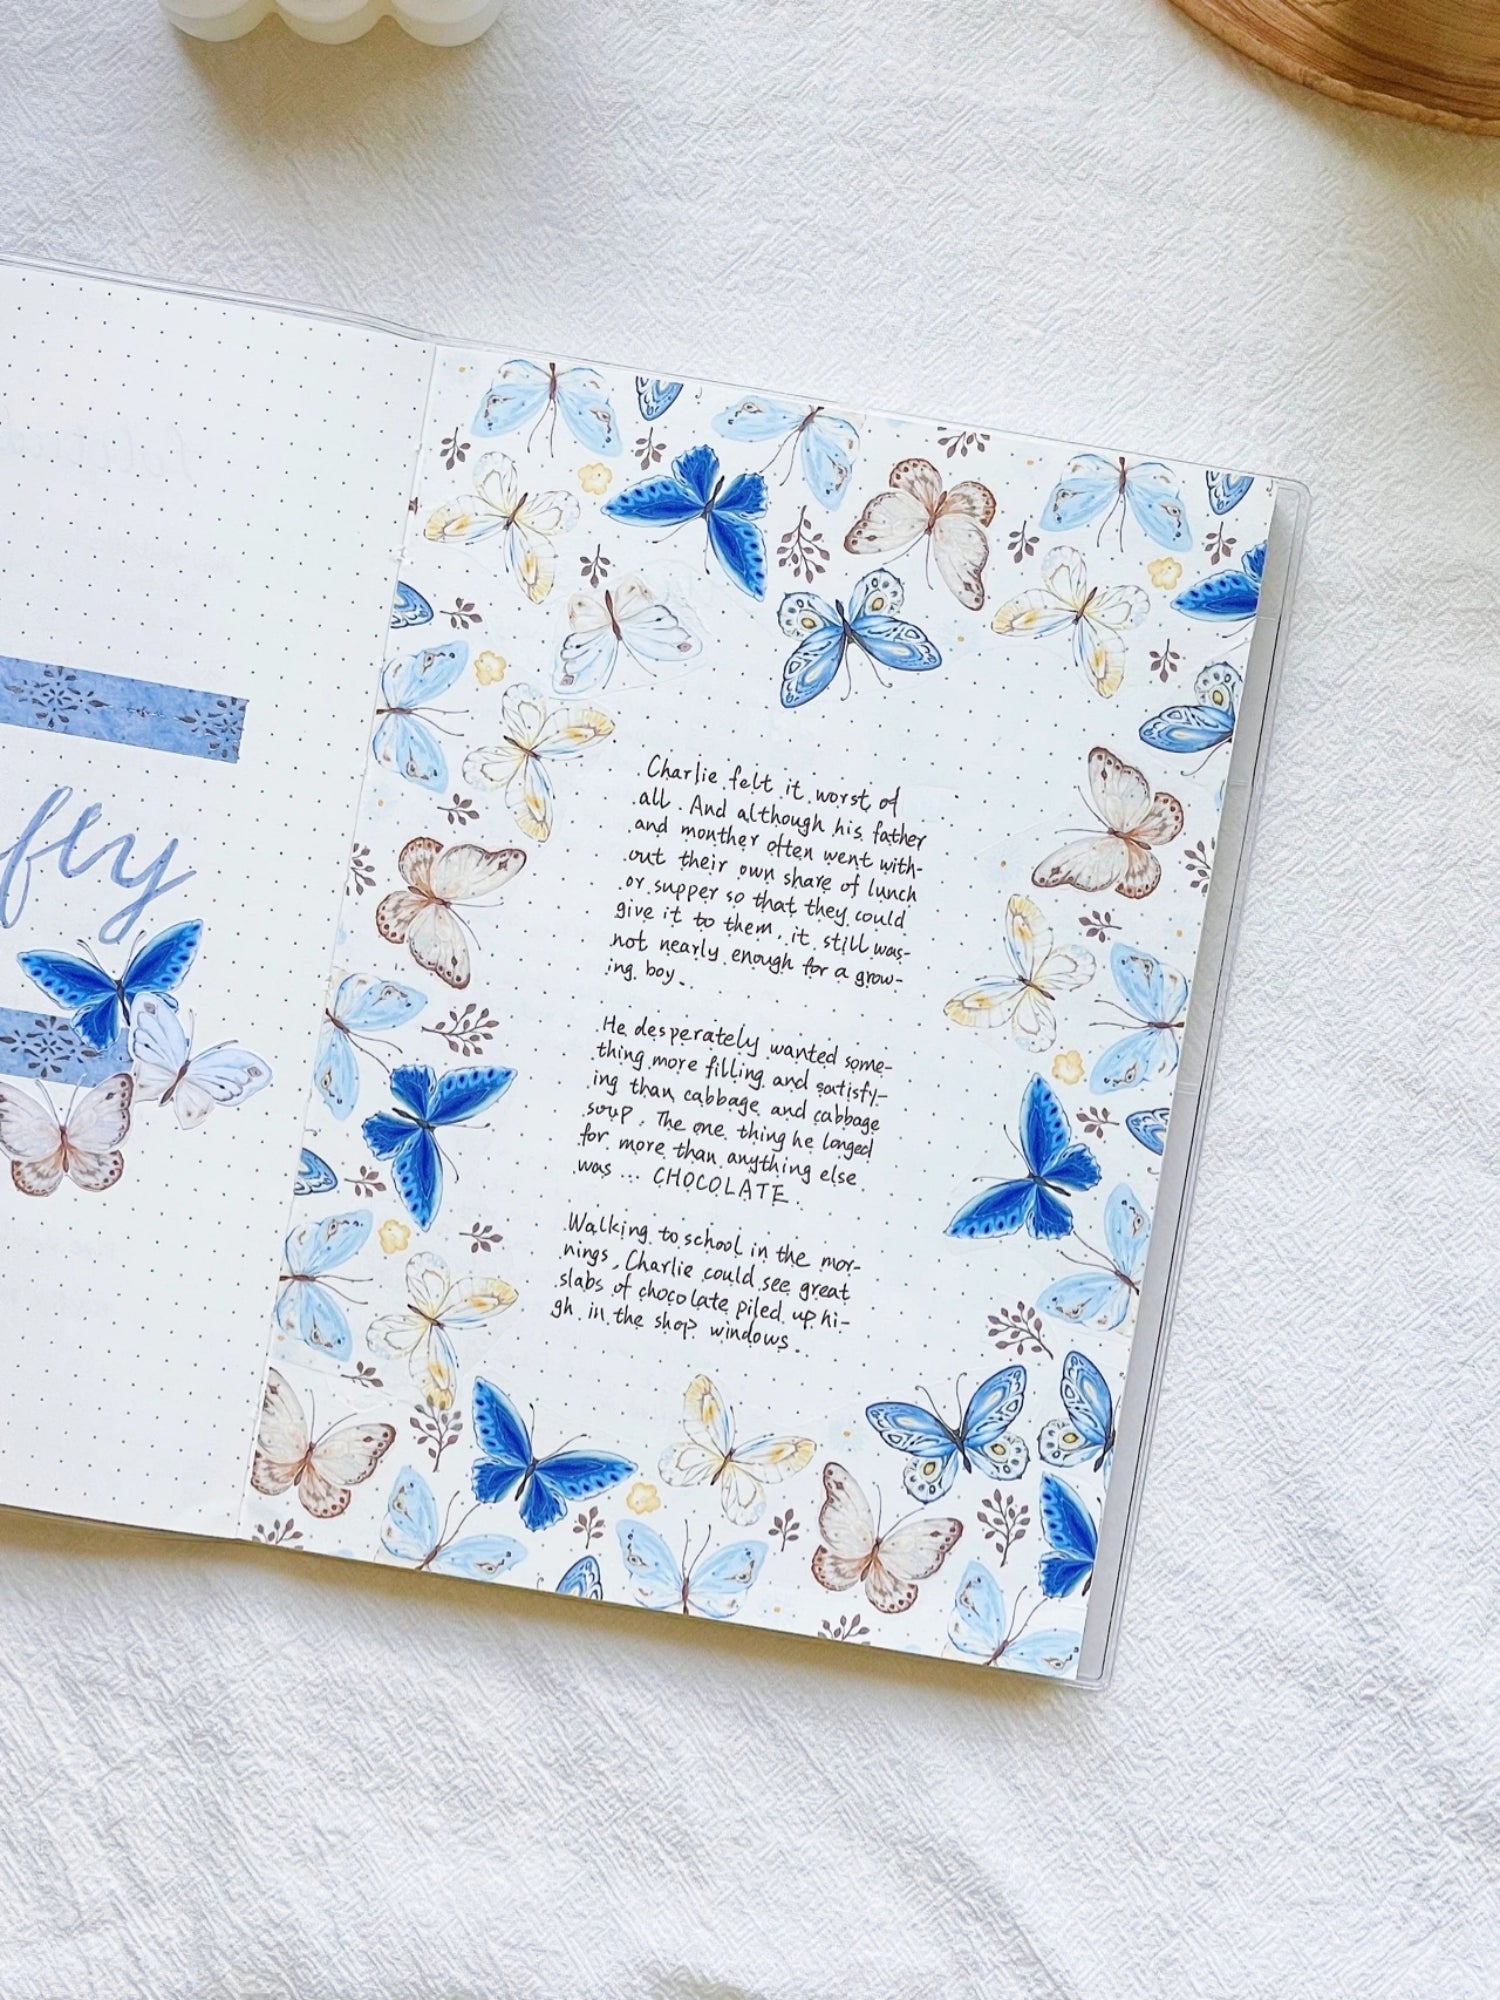 Finally I made a spread with this beautiful blue pet tape from @Shop R, Scrapbook